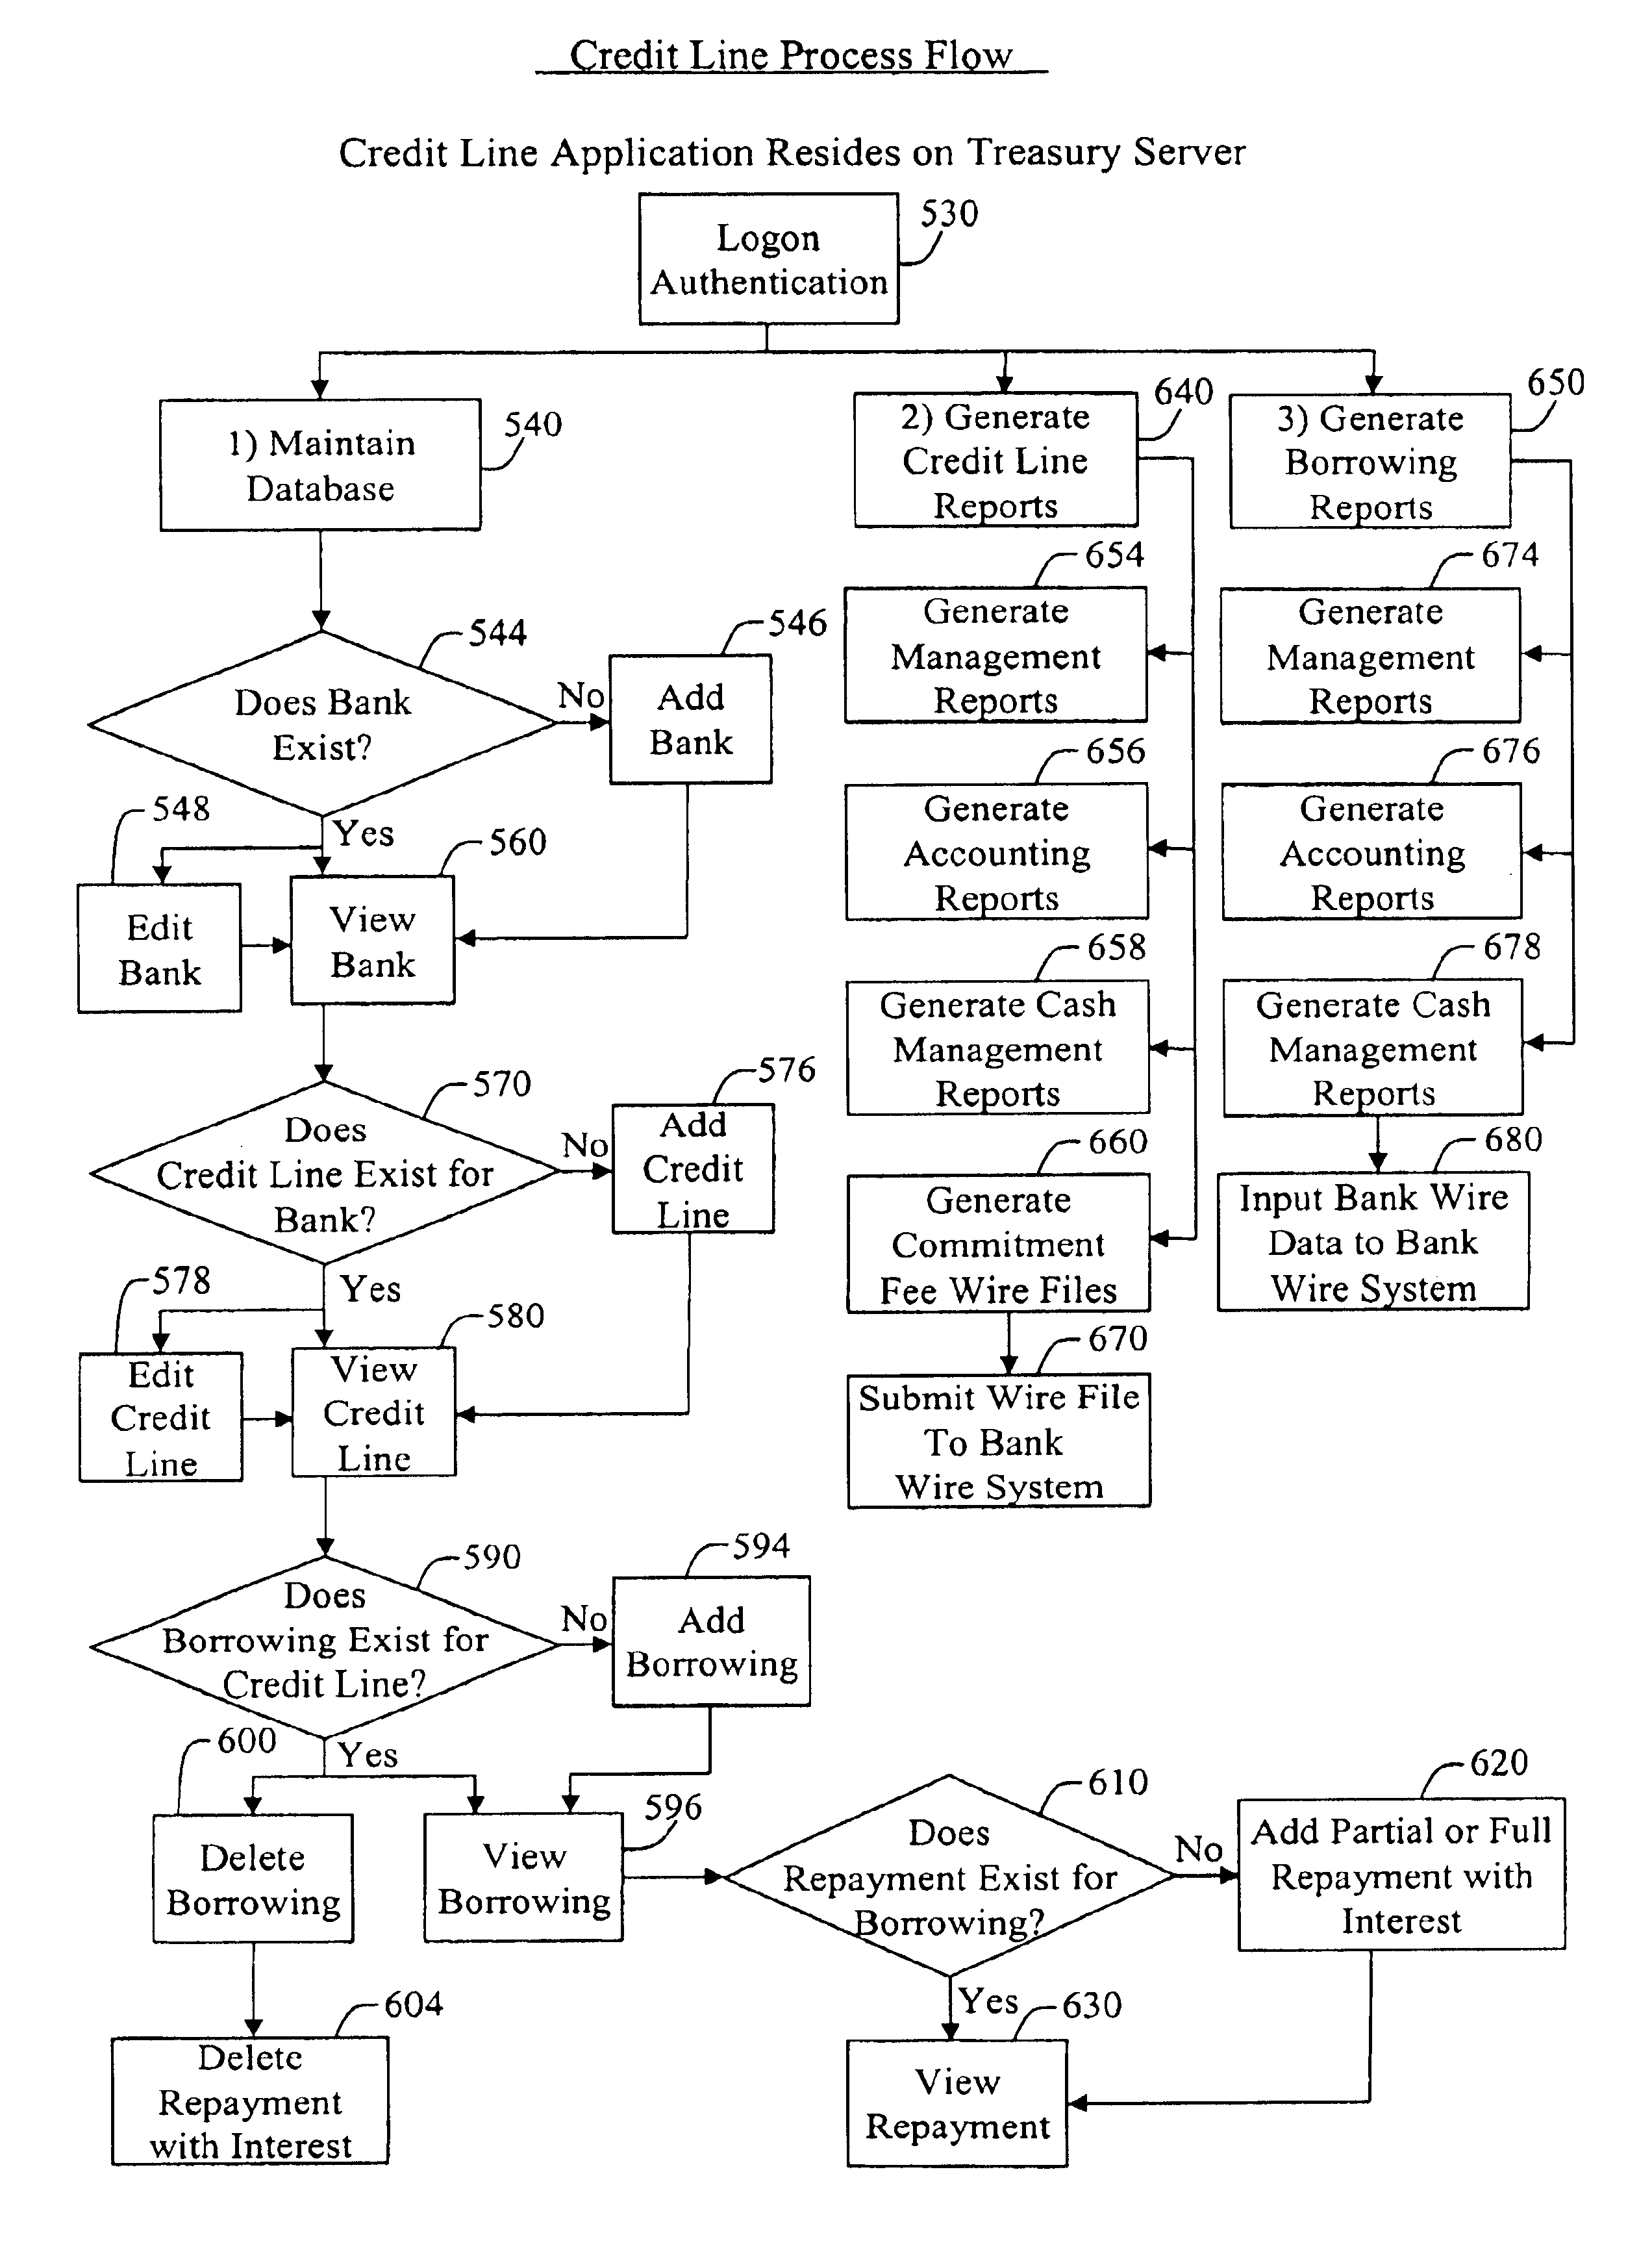 Systems and methods for credit line monitoring